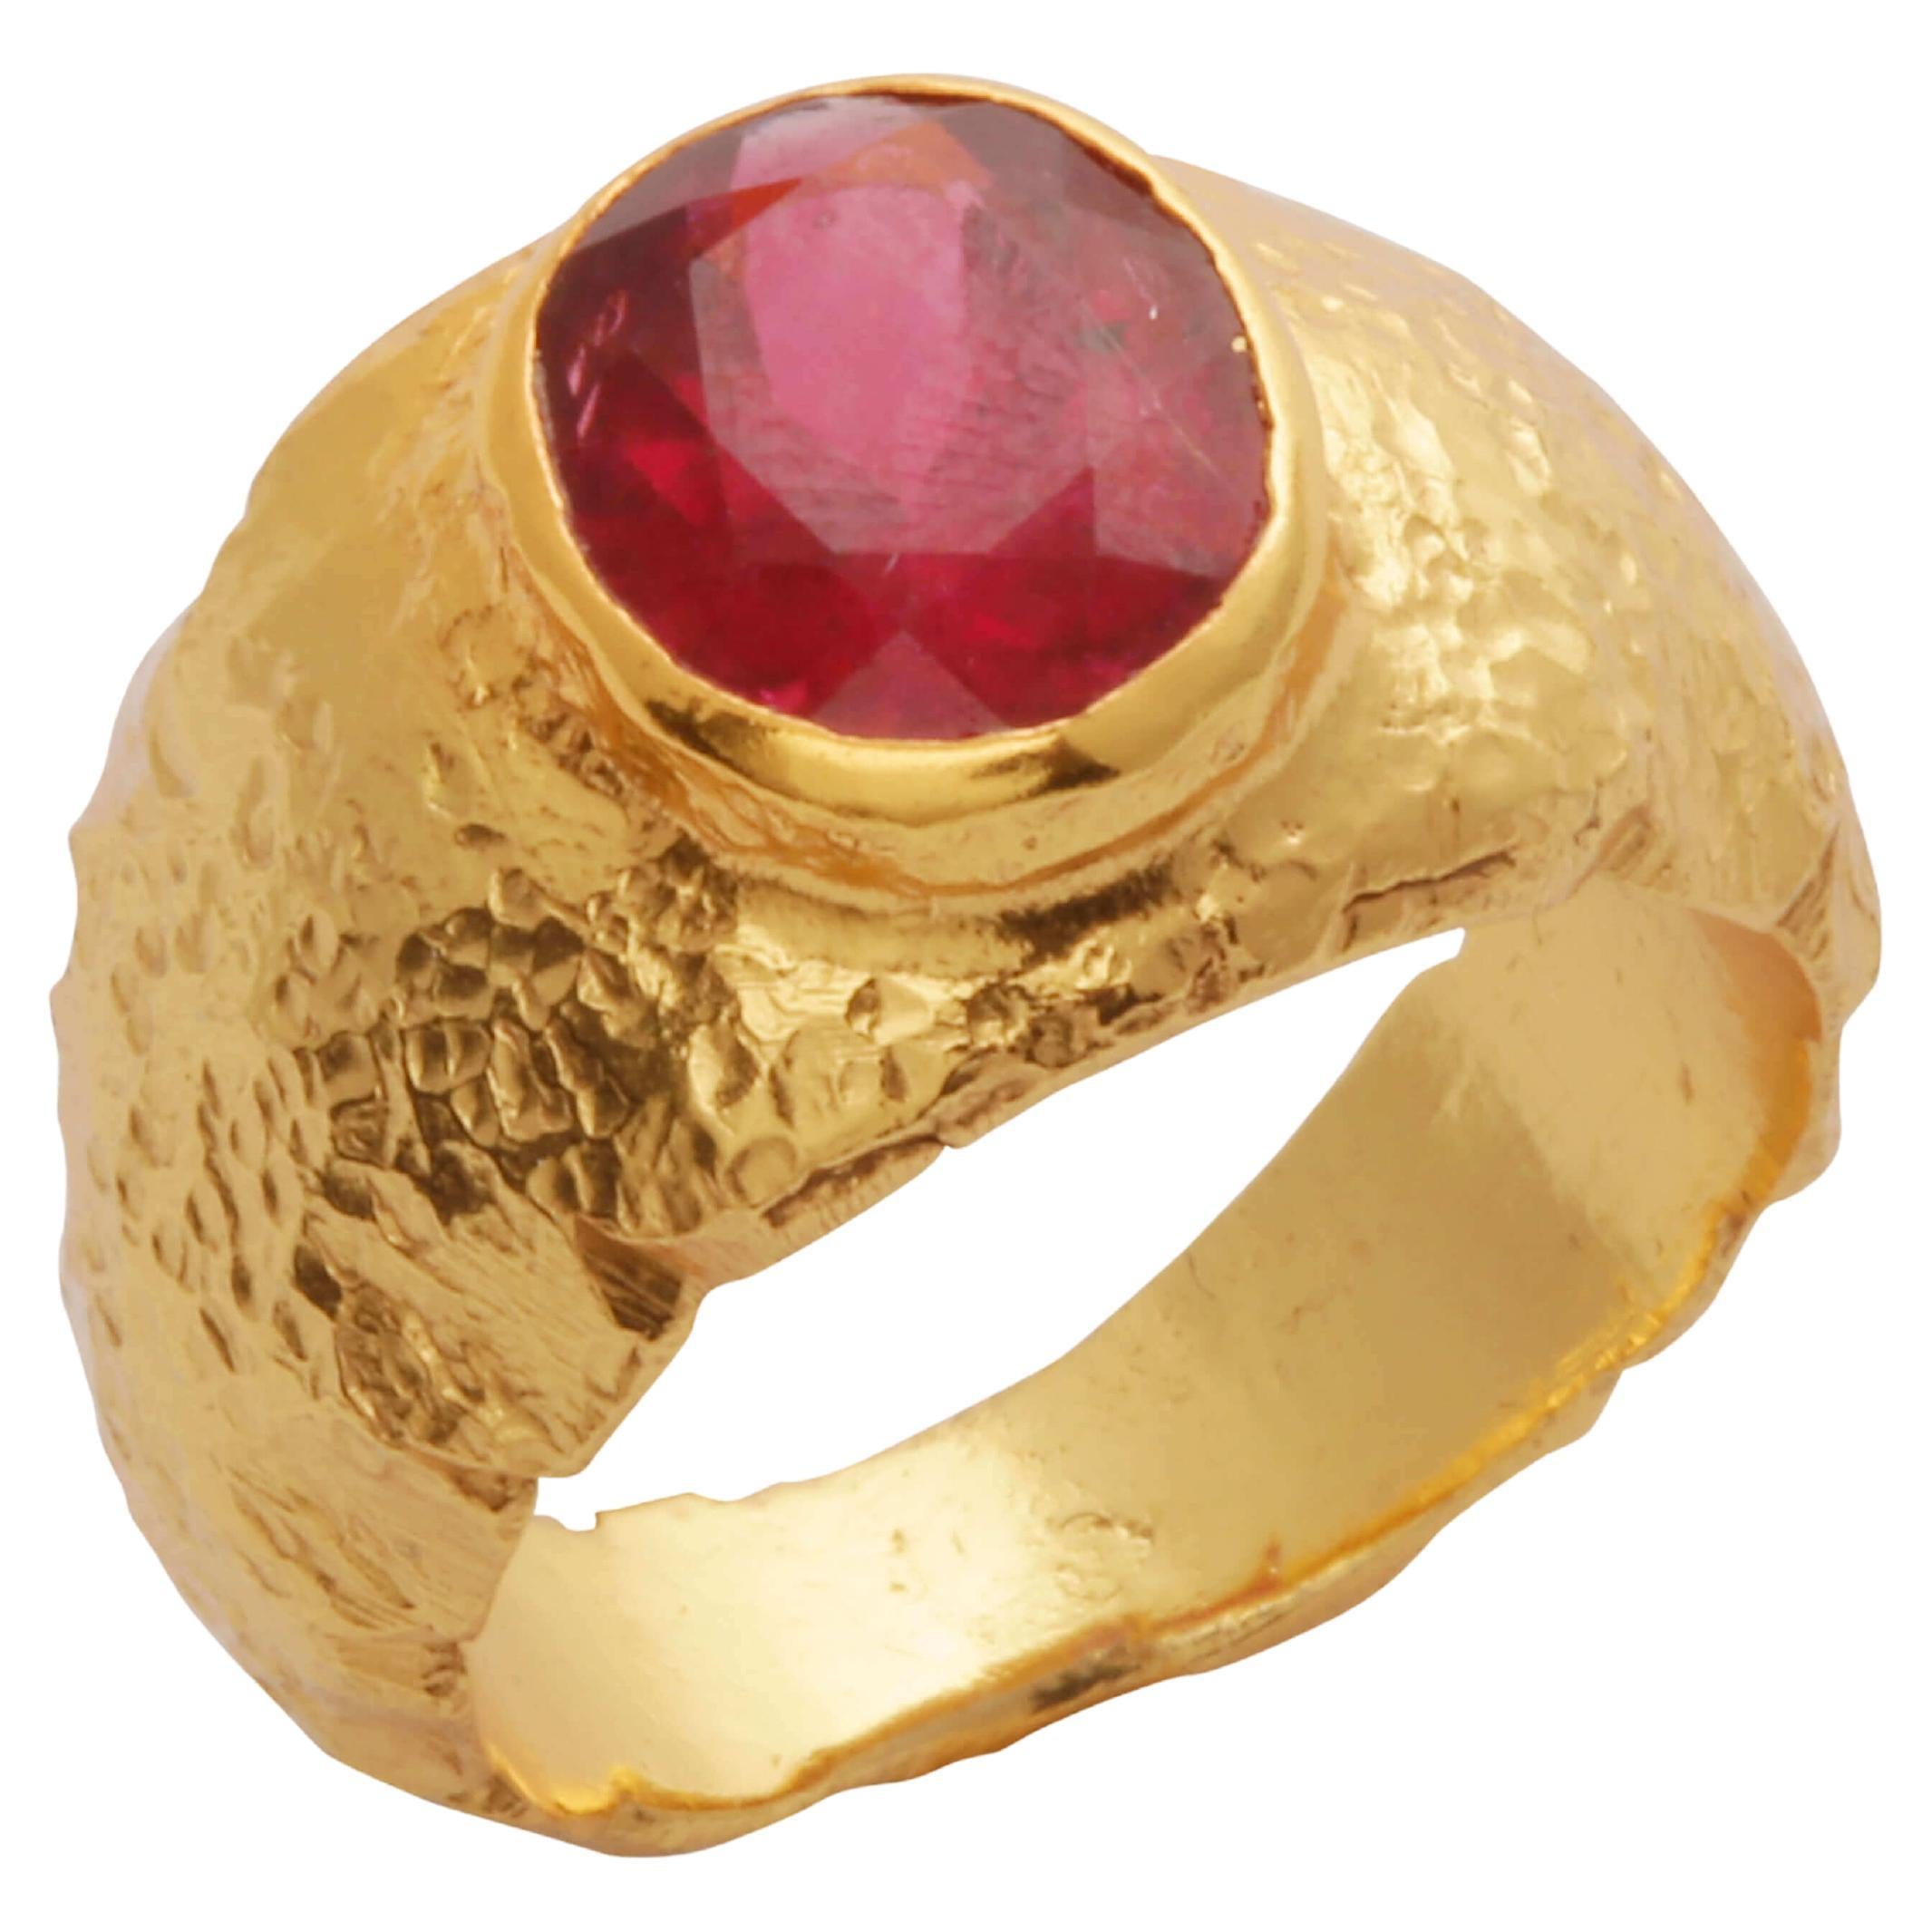 Hammered Gold, Ruby Ring Band